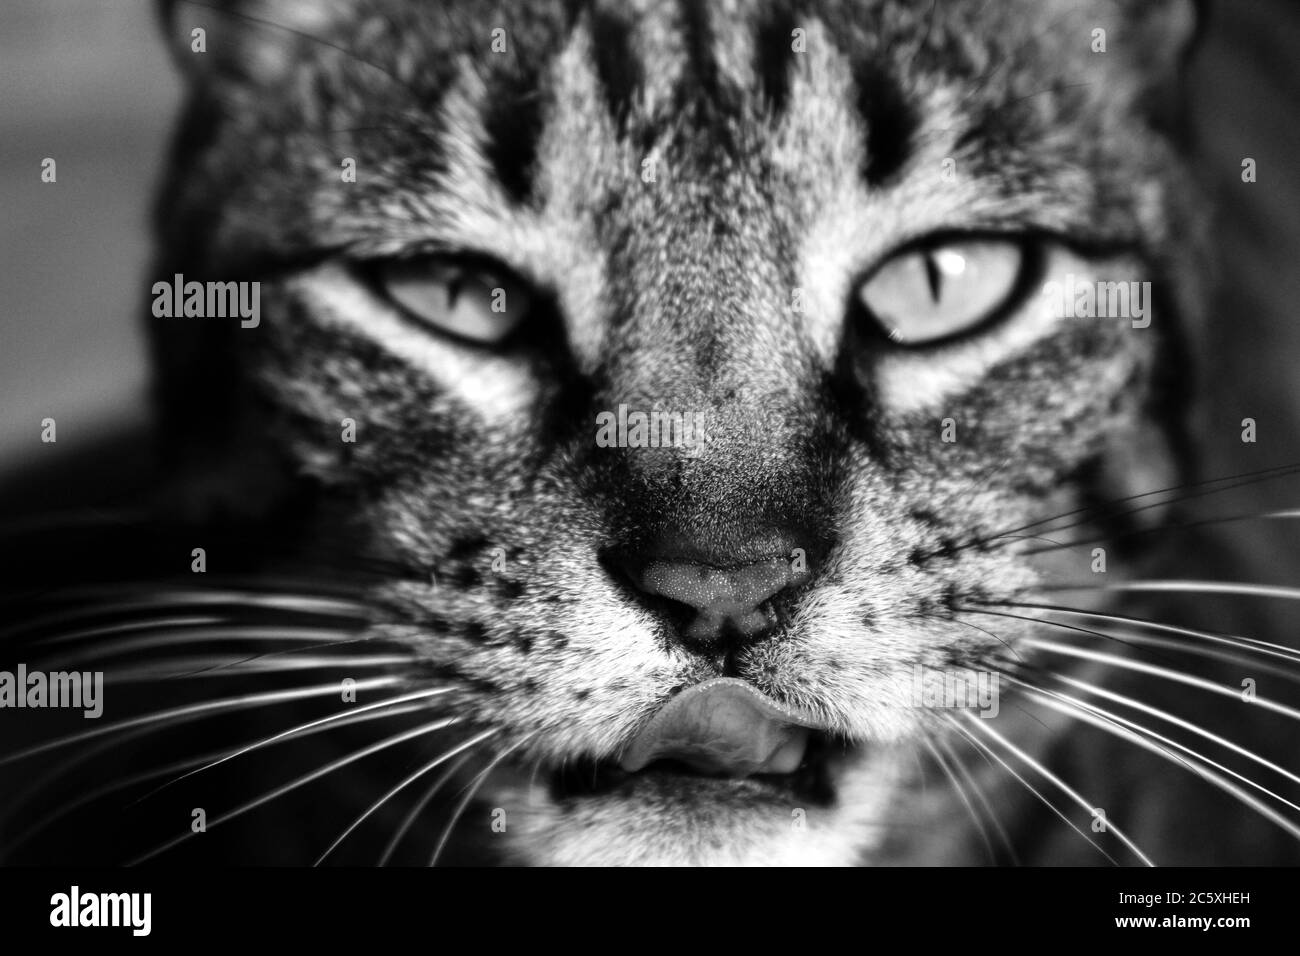 black and white cat licking lips images Stock Photo